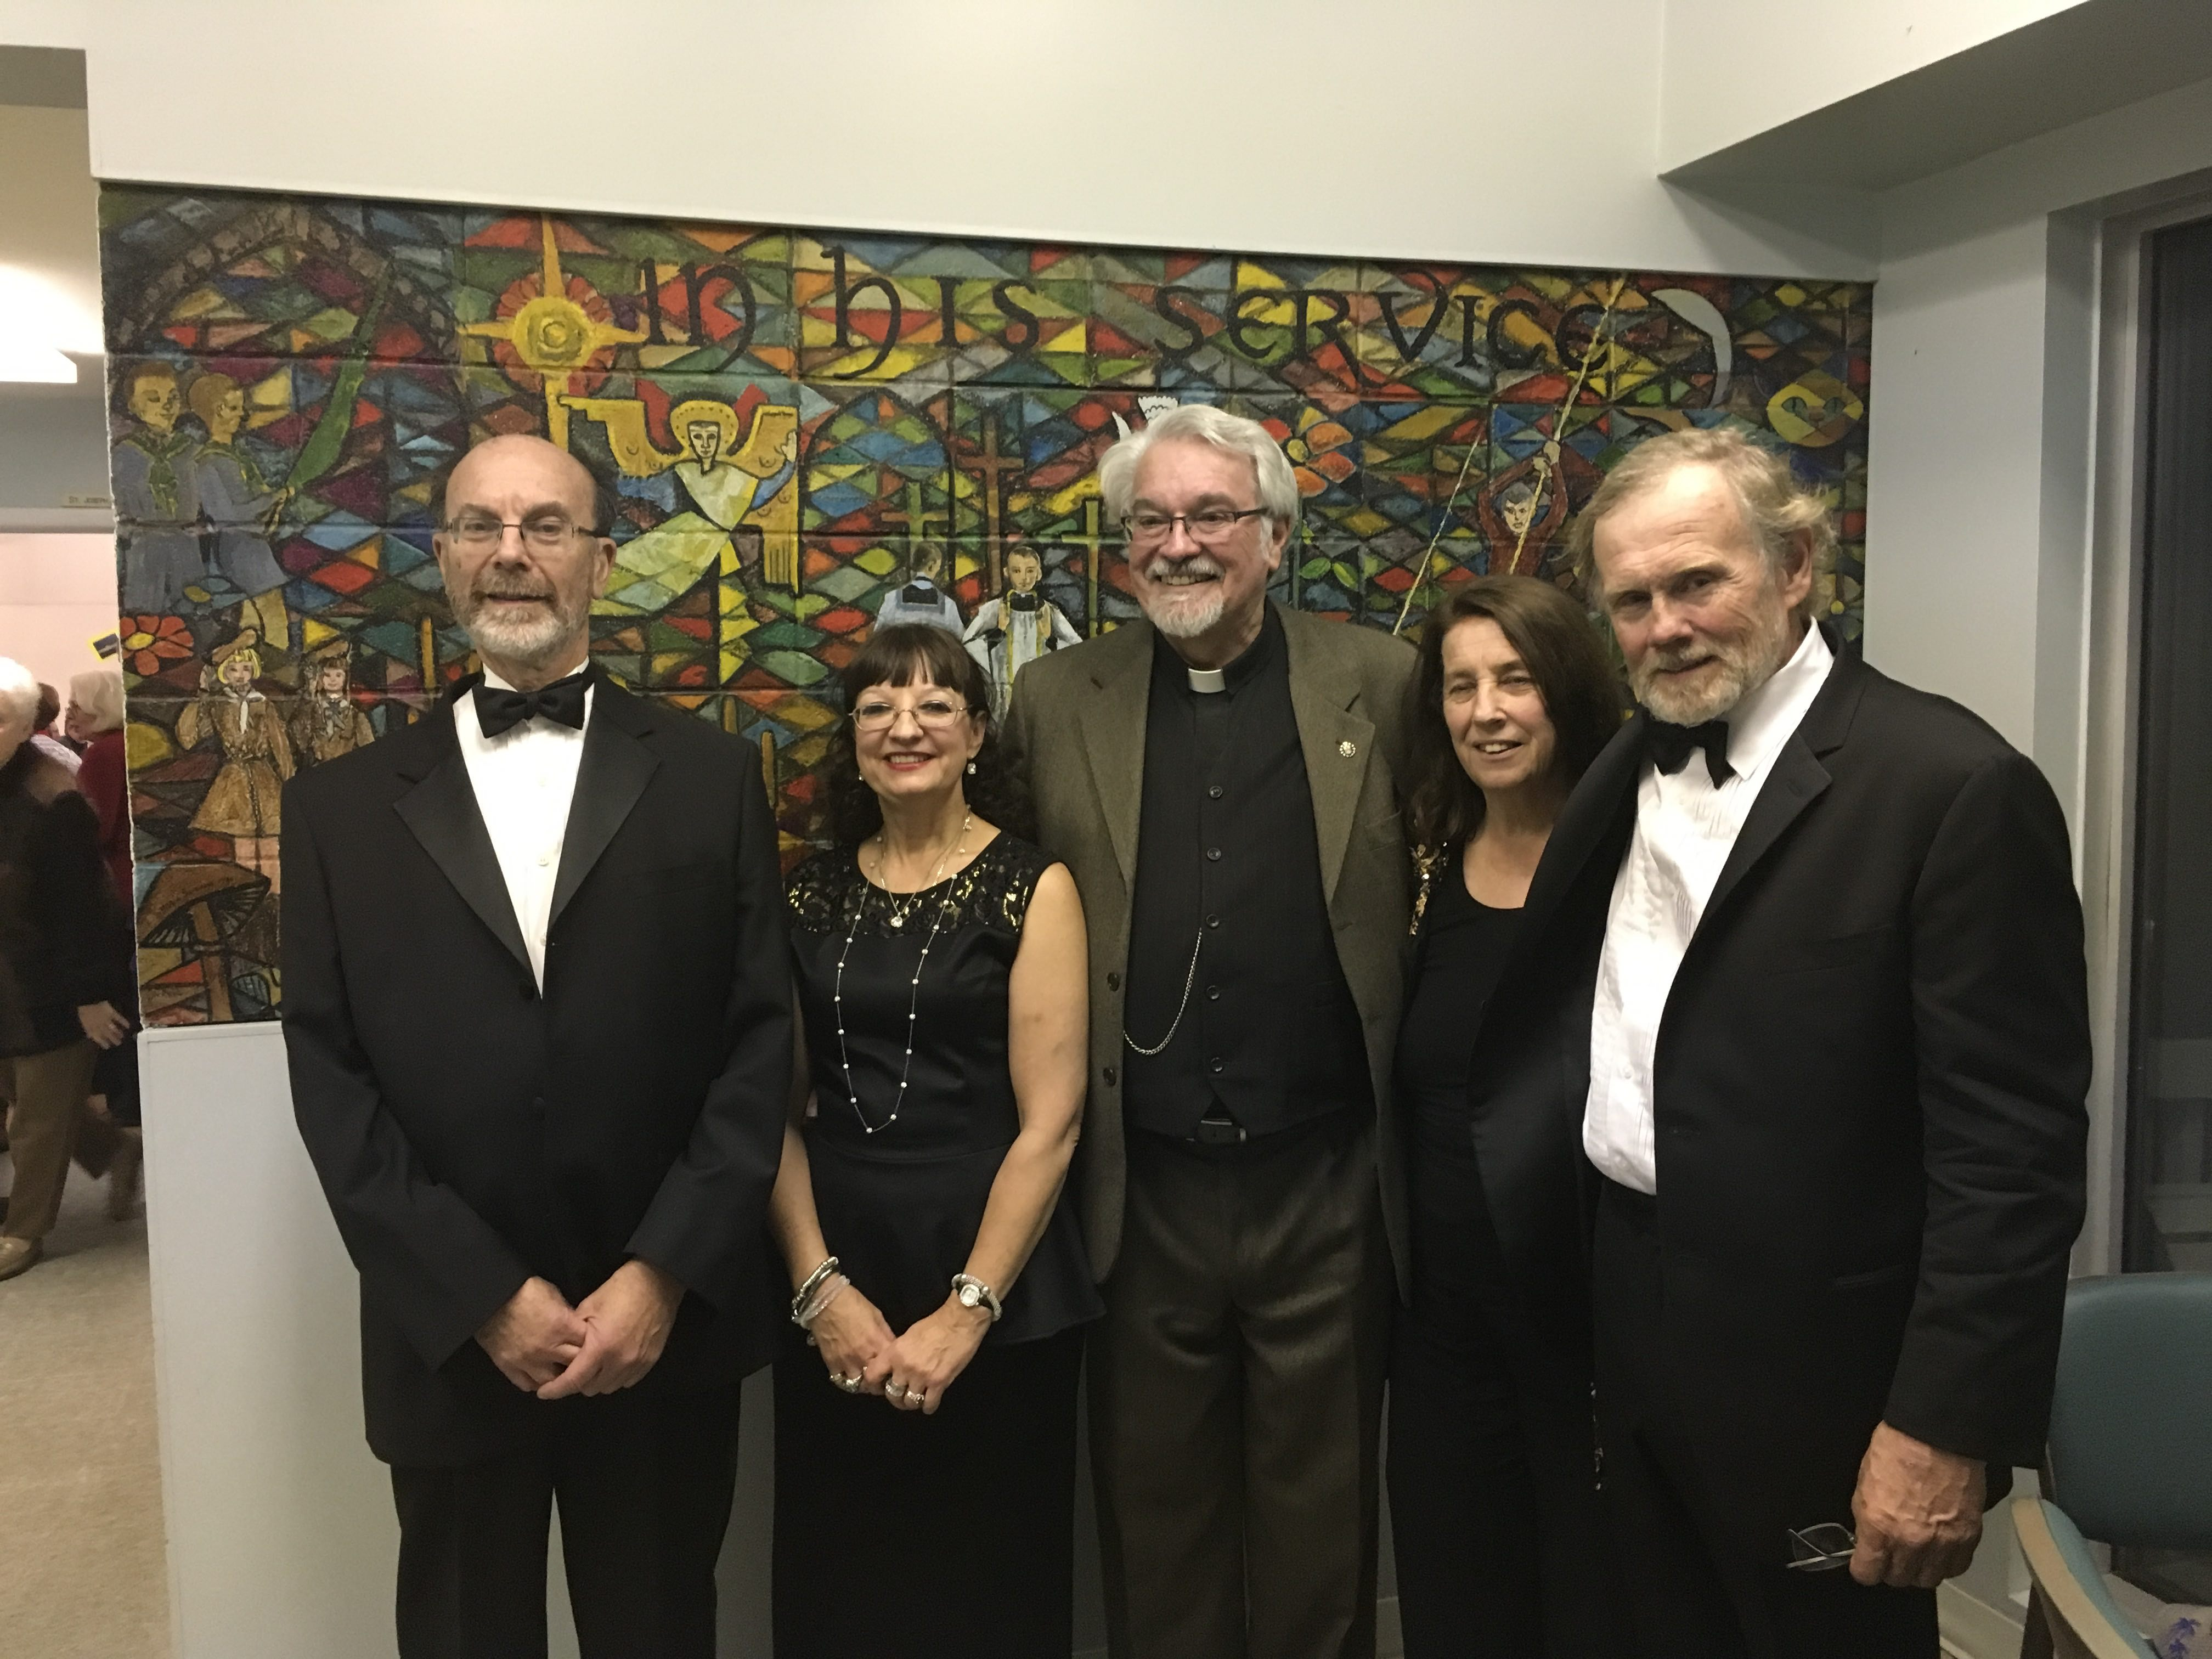 “The group” from Song of the Grand poses in front of the mural at Christ Church Flamborough (left to right): pianist and vocals Brahm Goldhamer, soprano Elizabeth Niec, narrator Canon Robert Brownlie, co-ordinator Susan Hall with writer, composer and vocalist George Hall.Photo: Submitted